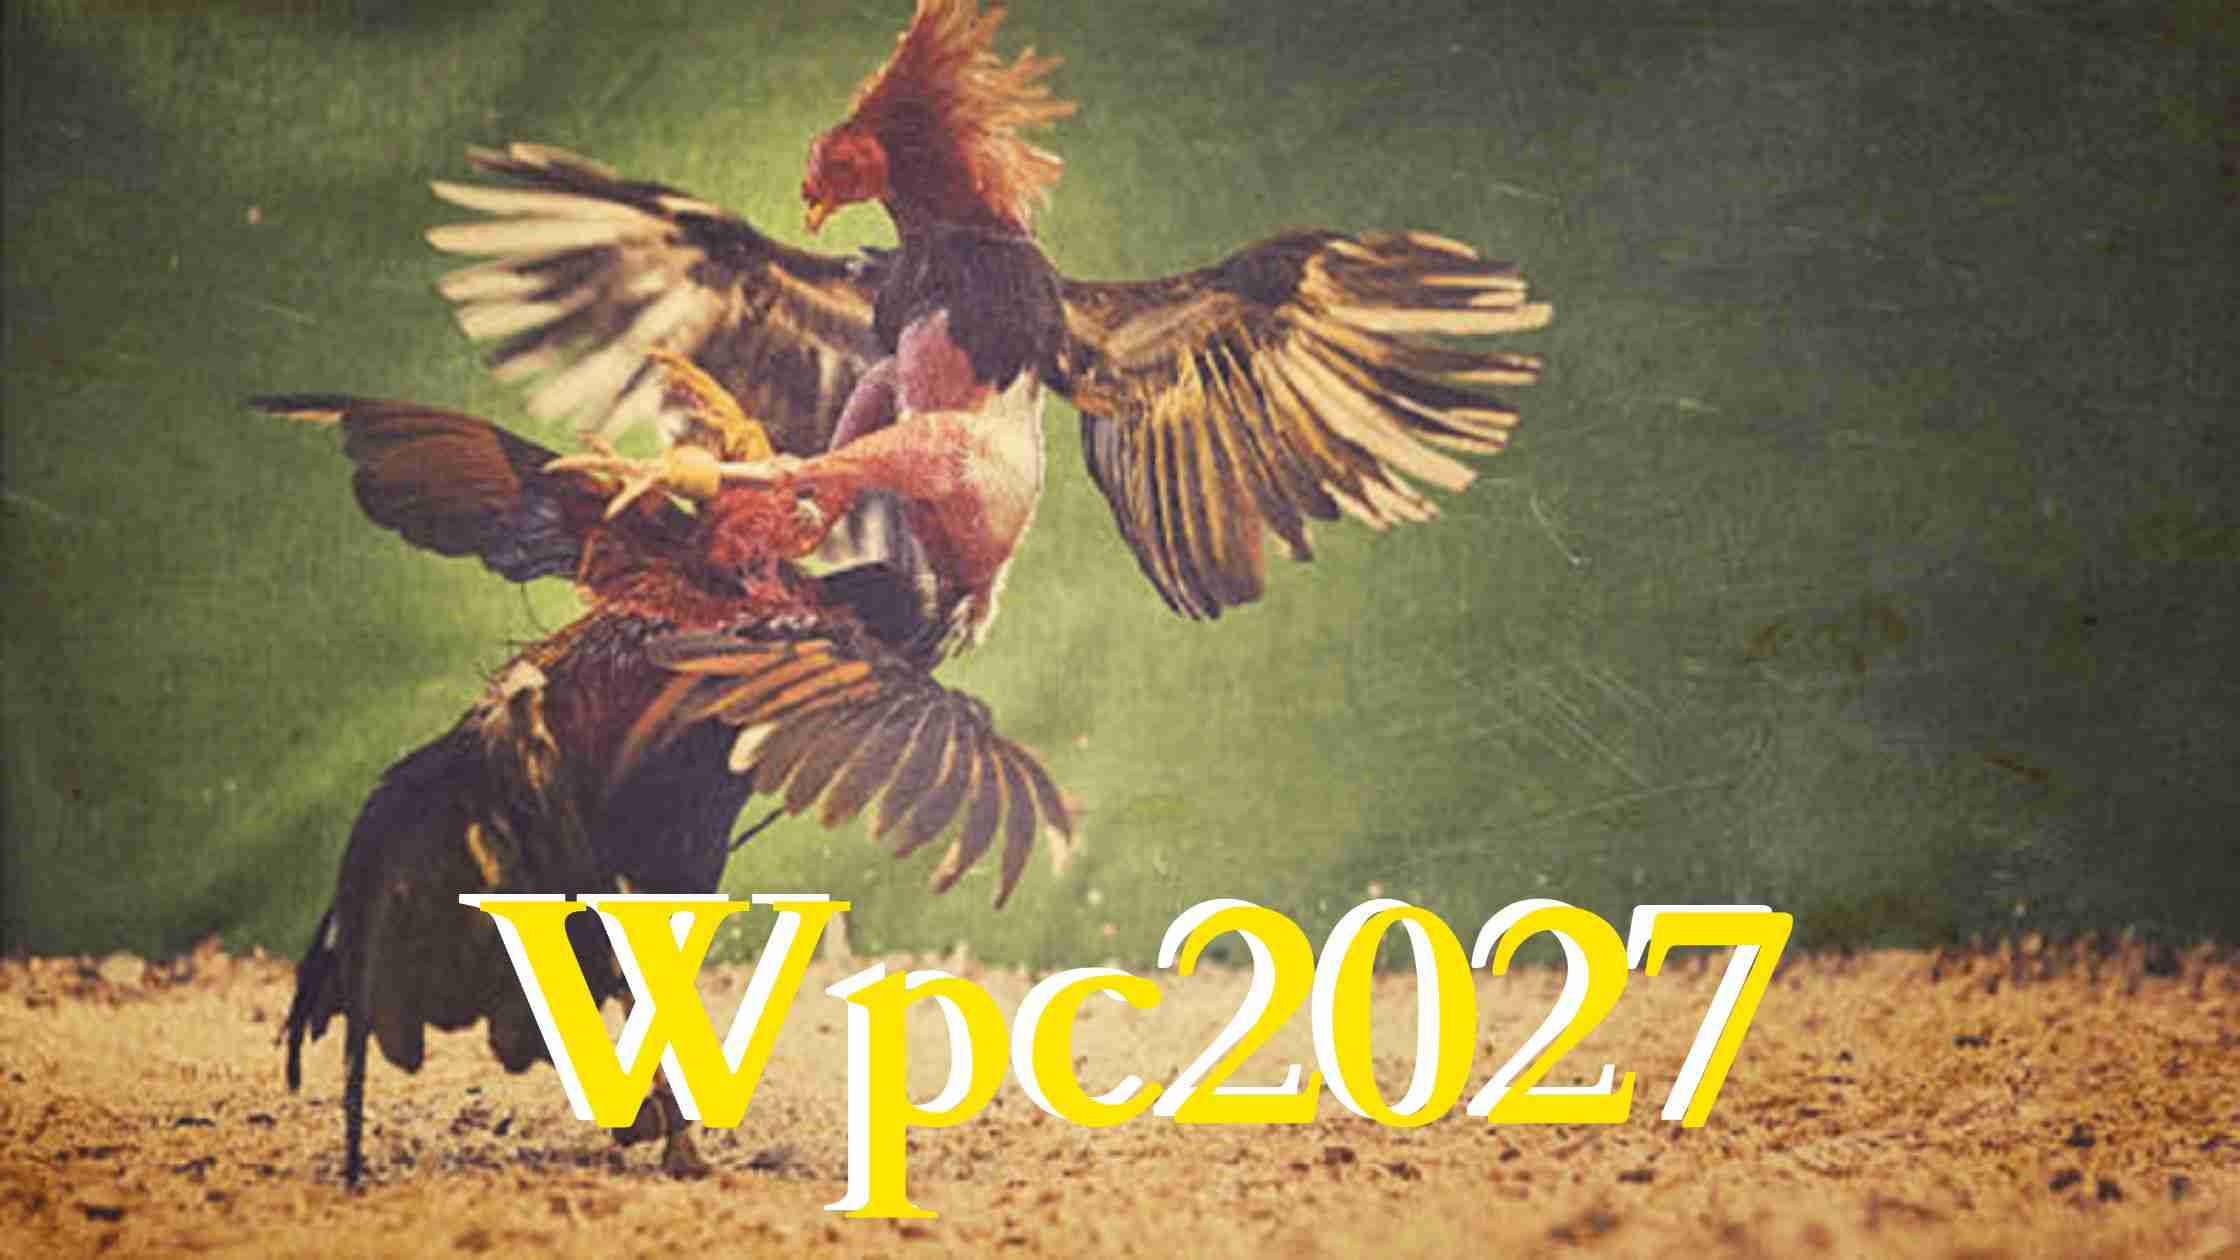 Wpc2027 Account Login & Dashboard - A Complete Guide